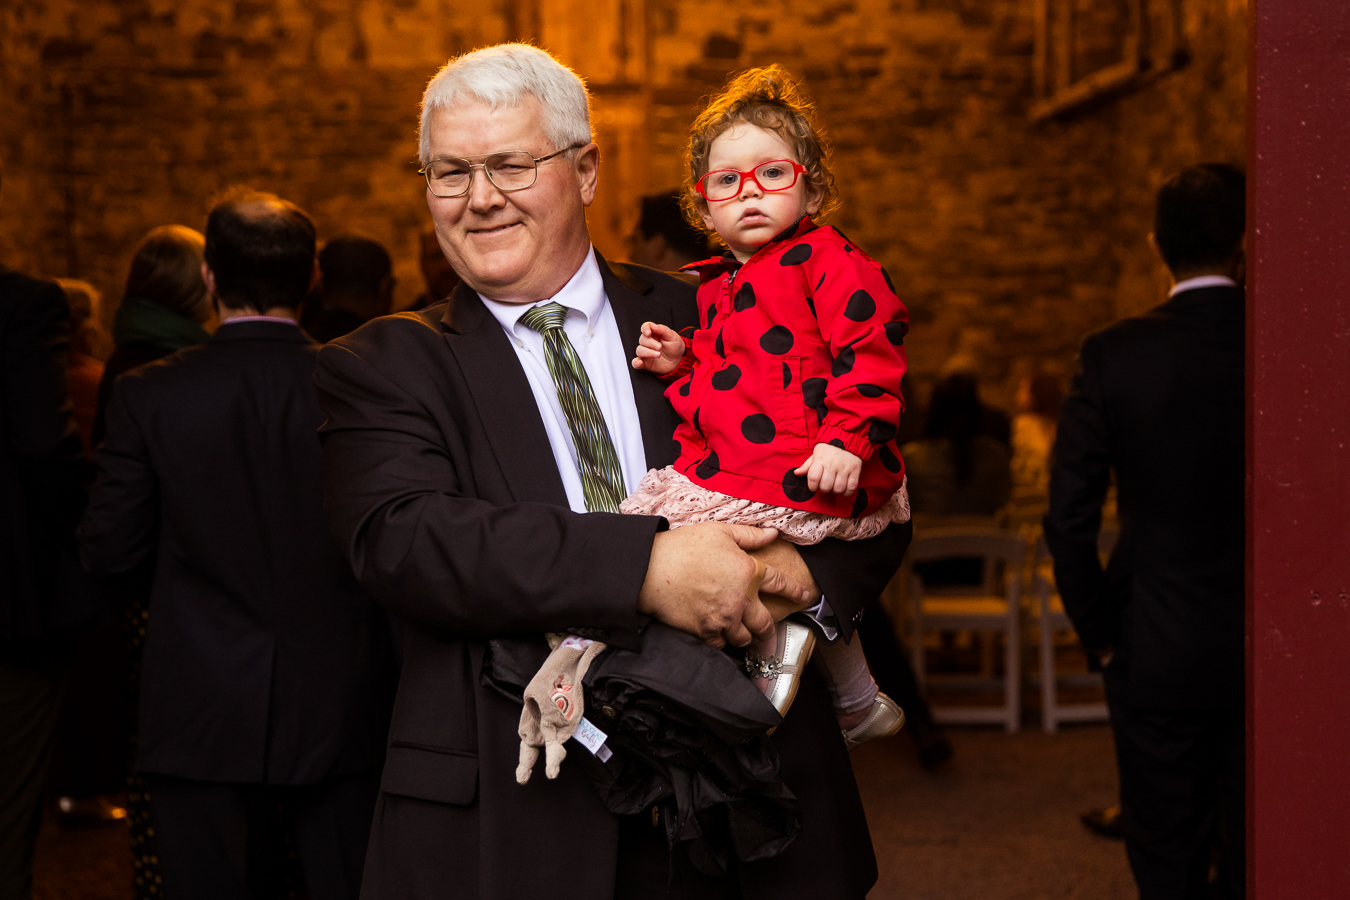 candid moment of a guest as he holds a little girl dressed in her ladybut outfit as they wait for the bride to walk down the aisle 